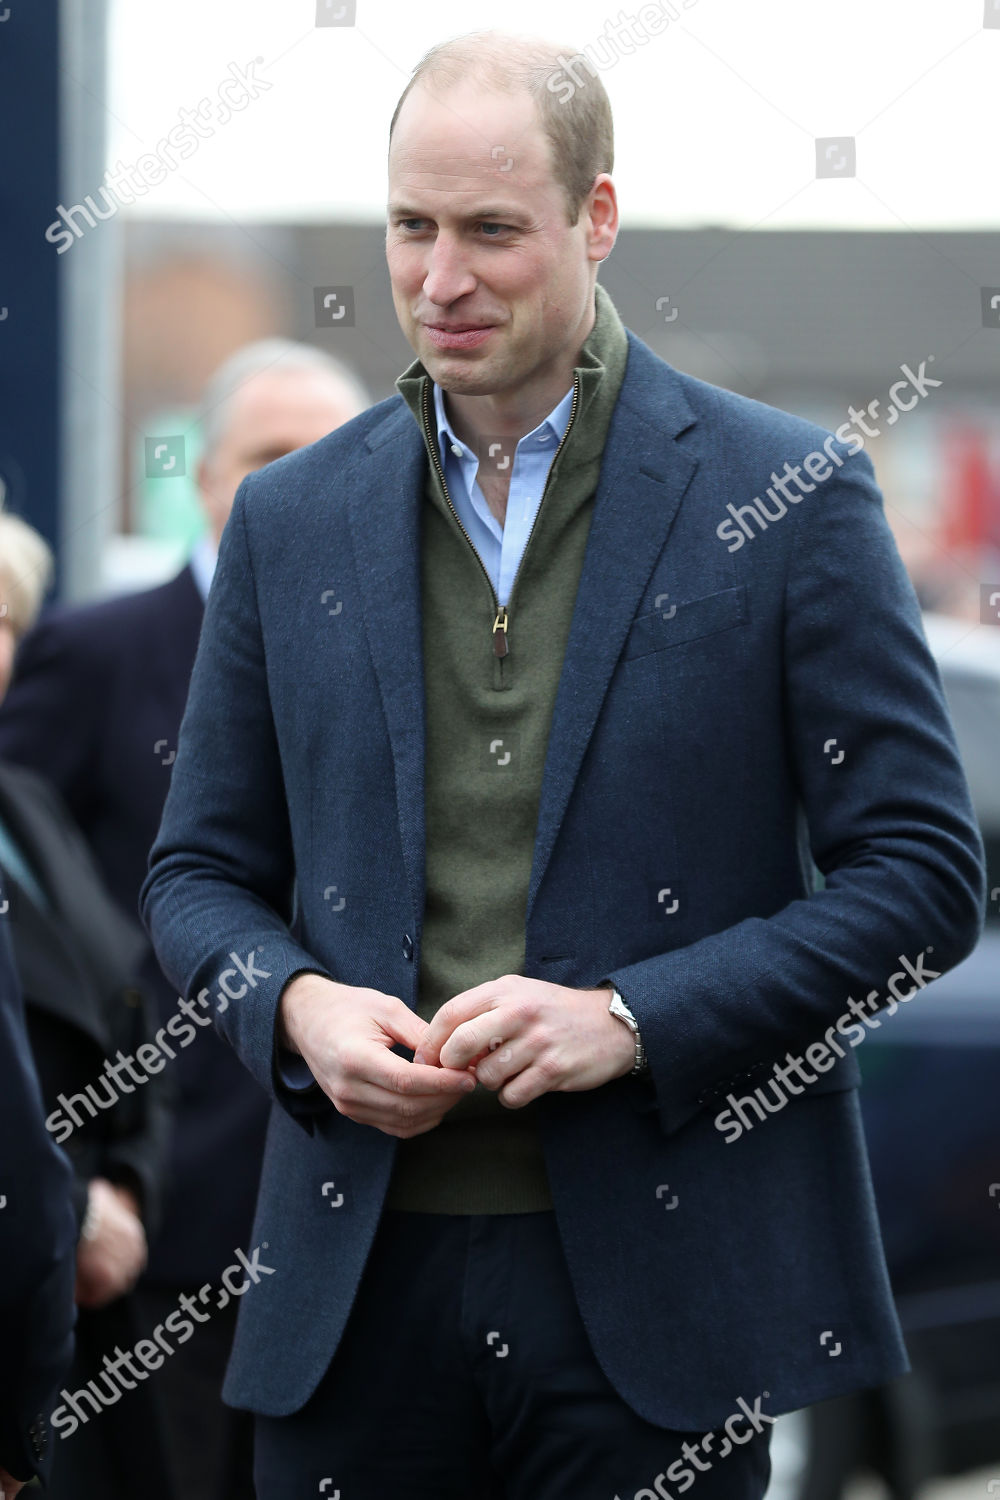 CASA REAL BRITÁNICA - Página 15 Prince-william-visit-to-liverpool-uk-shutterstock-editorial-10543630a